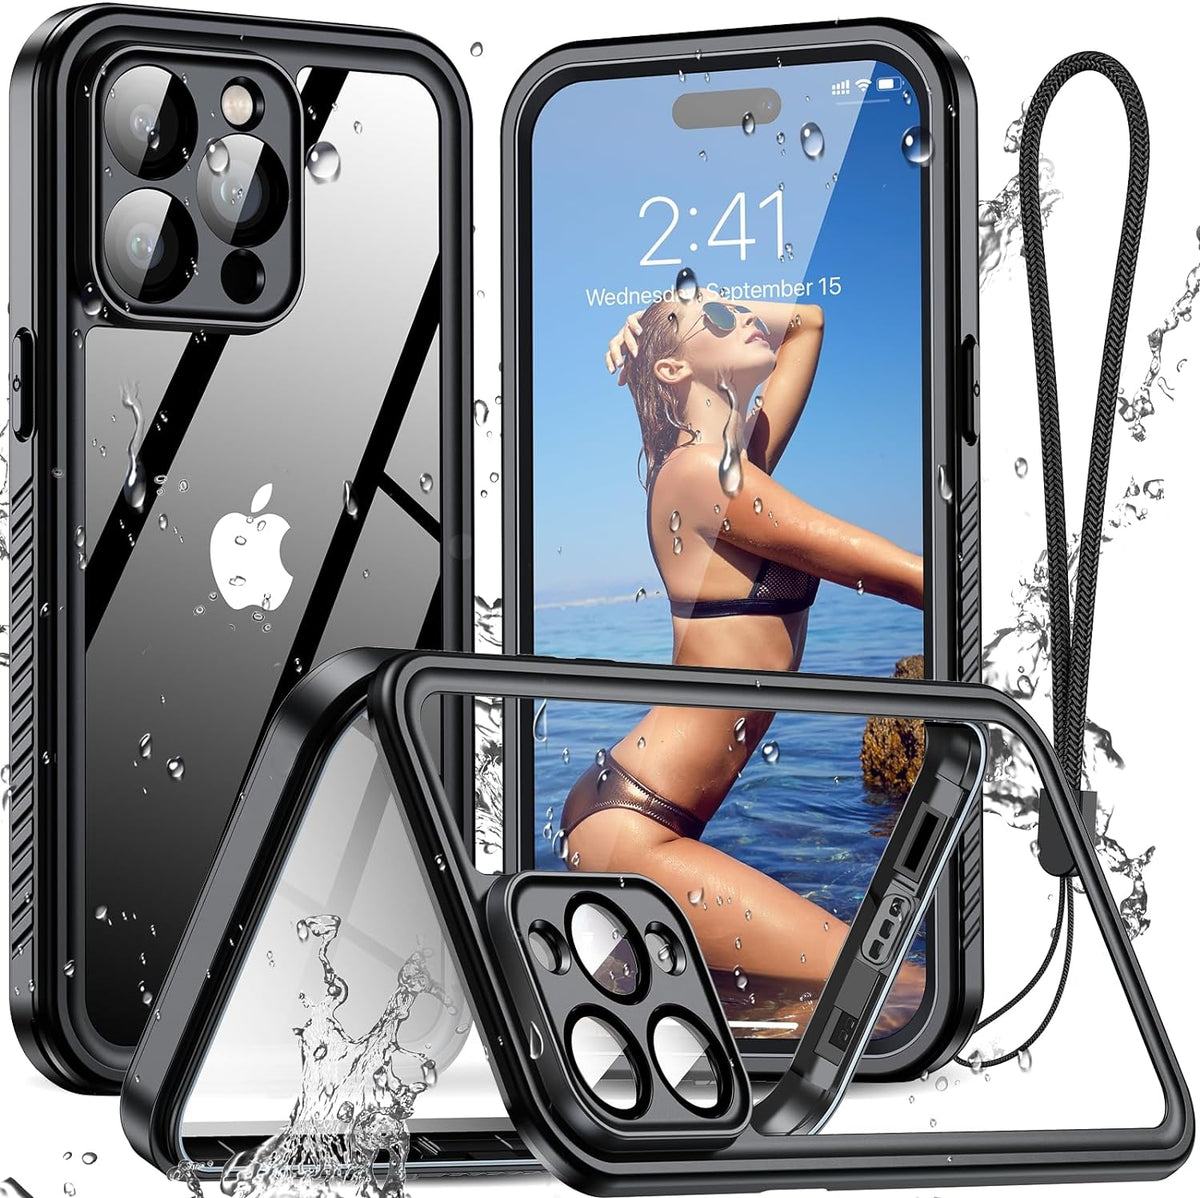 Humixx for iPhone 15 Pro Max Case Waterproof, [14 FT Military Dropproof][IP68 Underwater] Built-in Lens & Screen Protector Full Body Shockproof Dustproof Anti-Scratch for 15 Pro Max Phone Case & iPhone 15 Pro Phone Case, Black